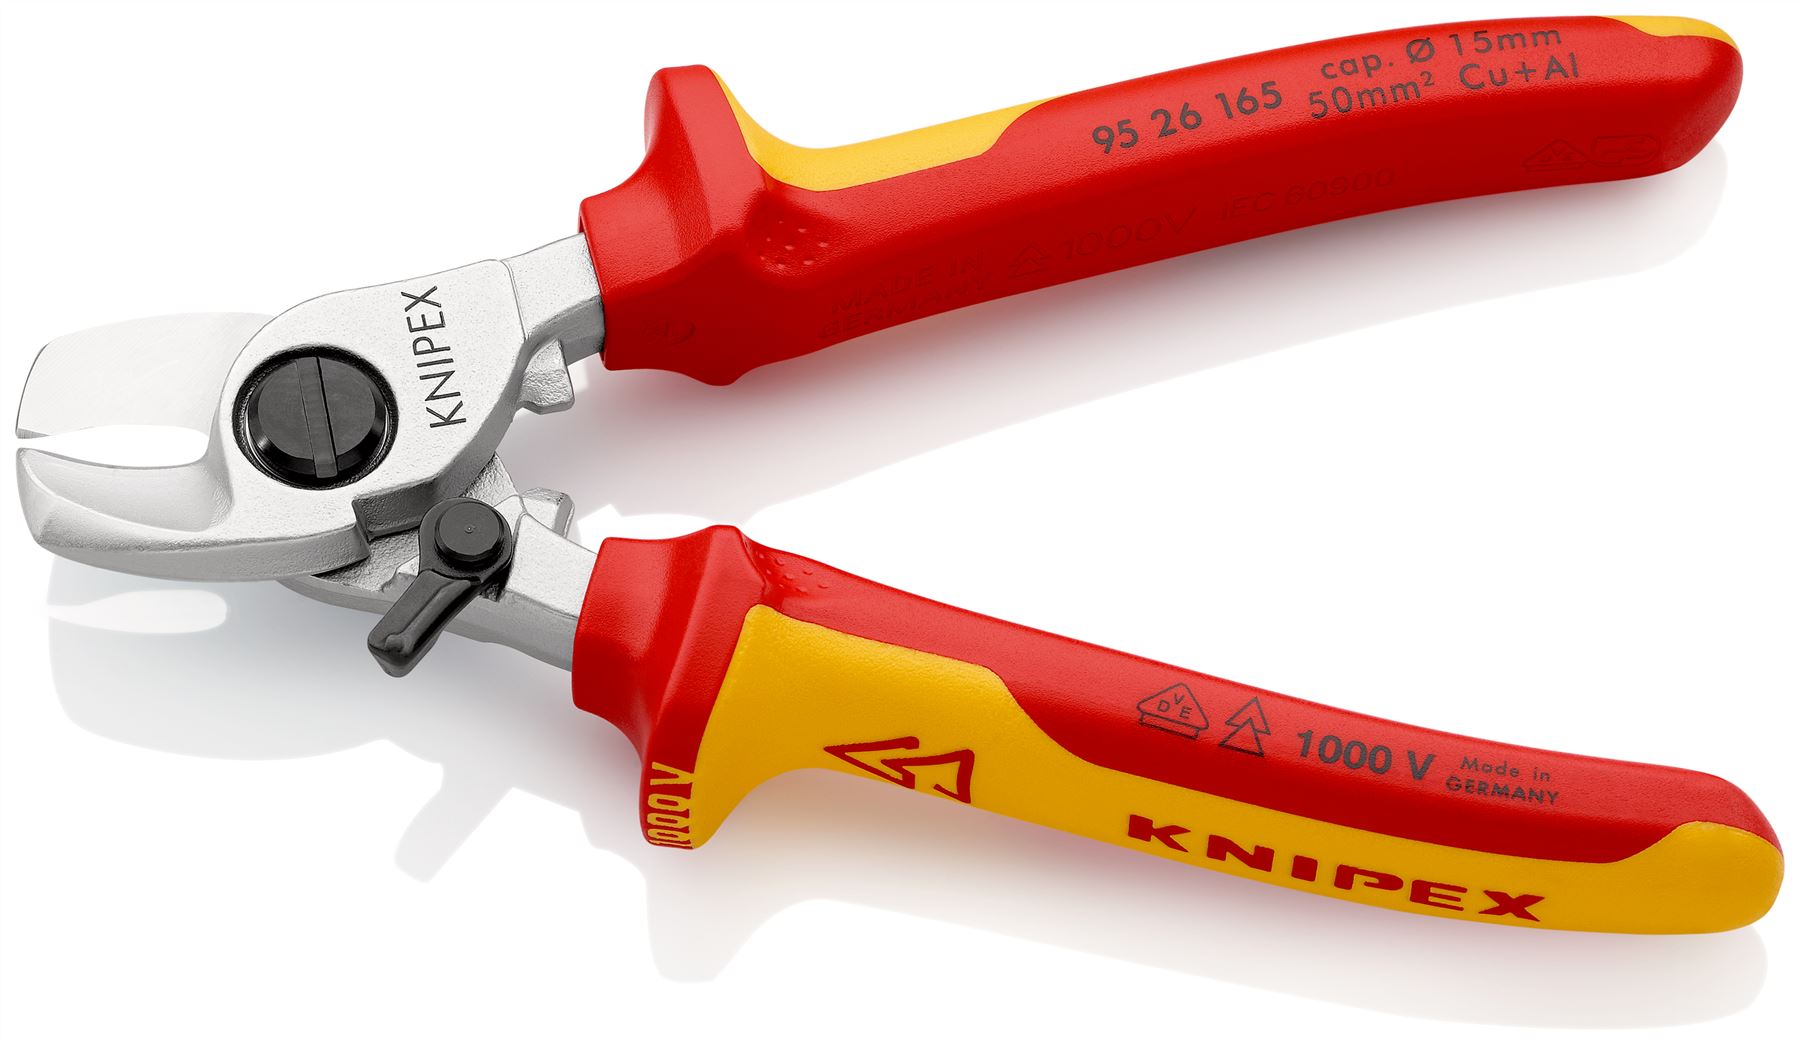 KNIPEX Cable Shears Cutting Pliers with Opening Spring 15mm Diameter Capacity 165mm VDE Multi Component Grips 95 26 165